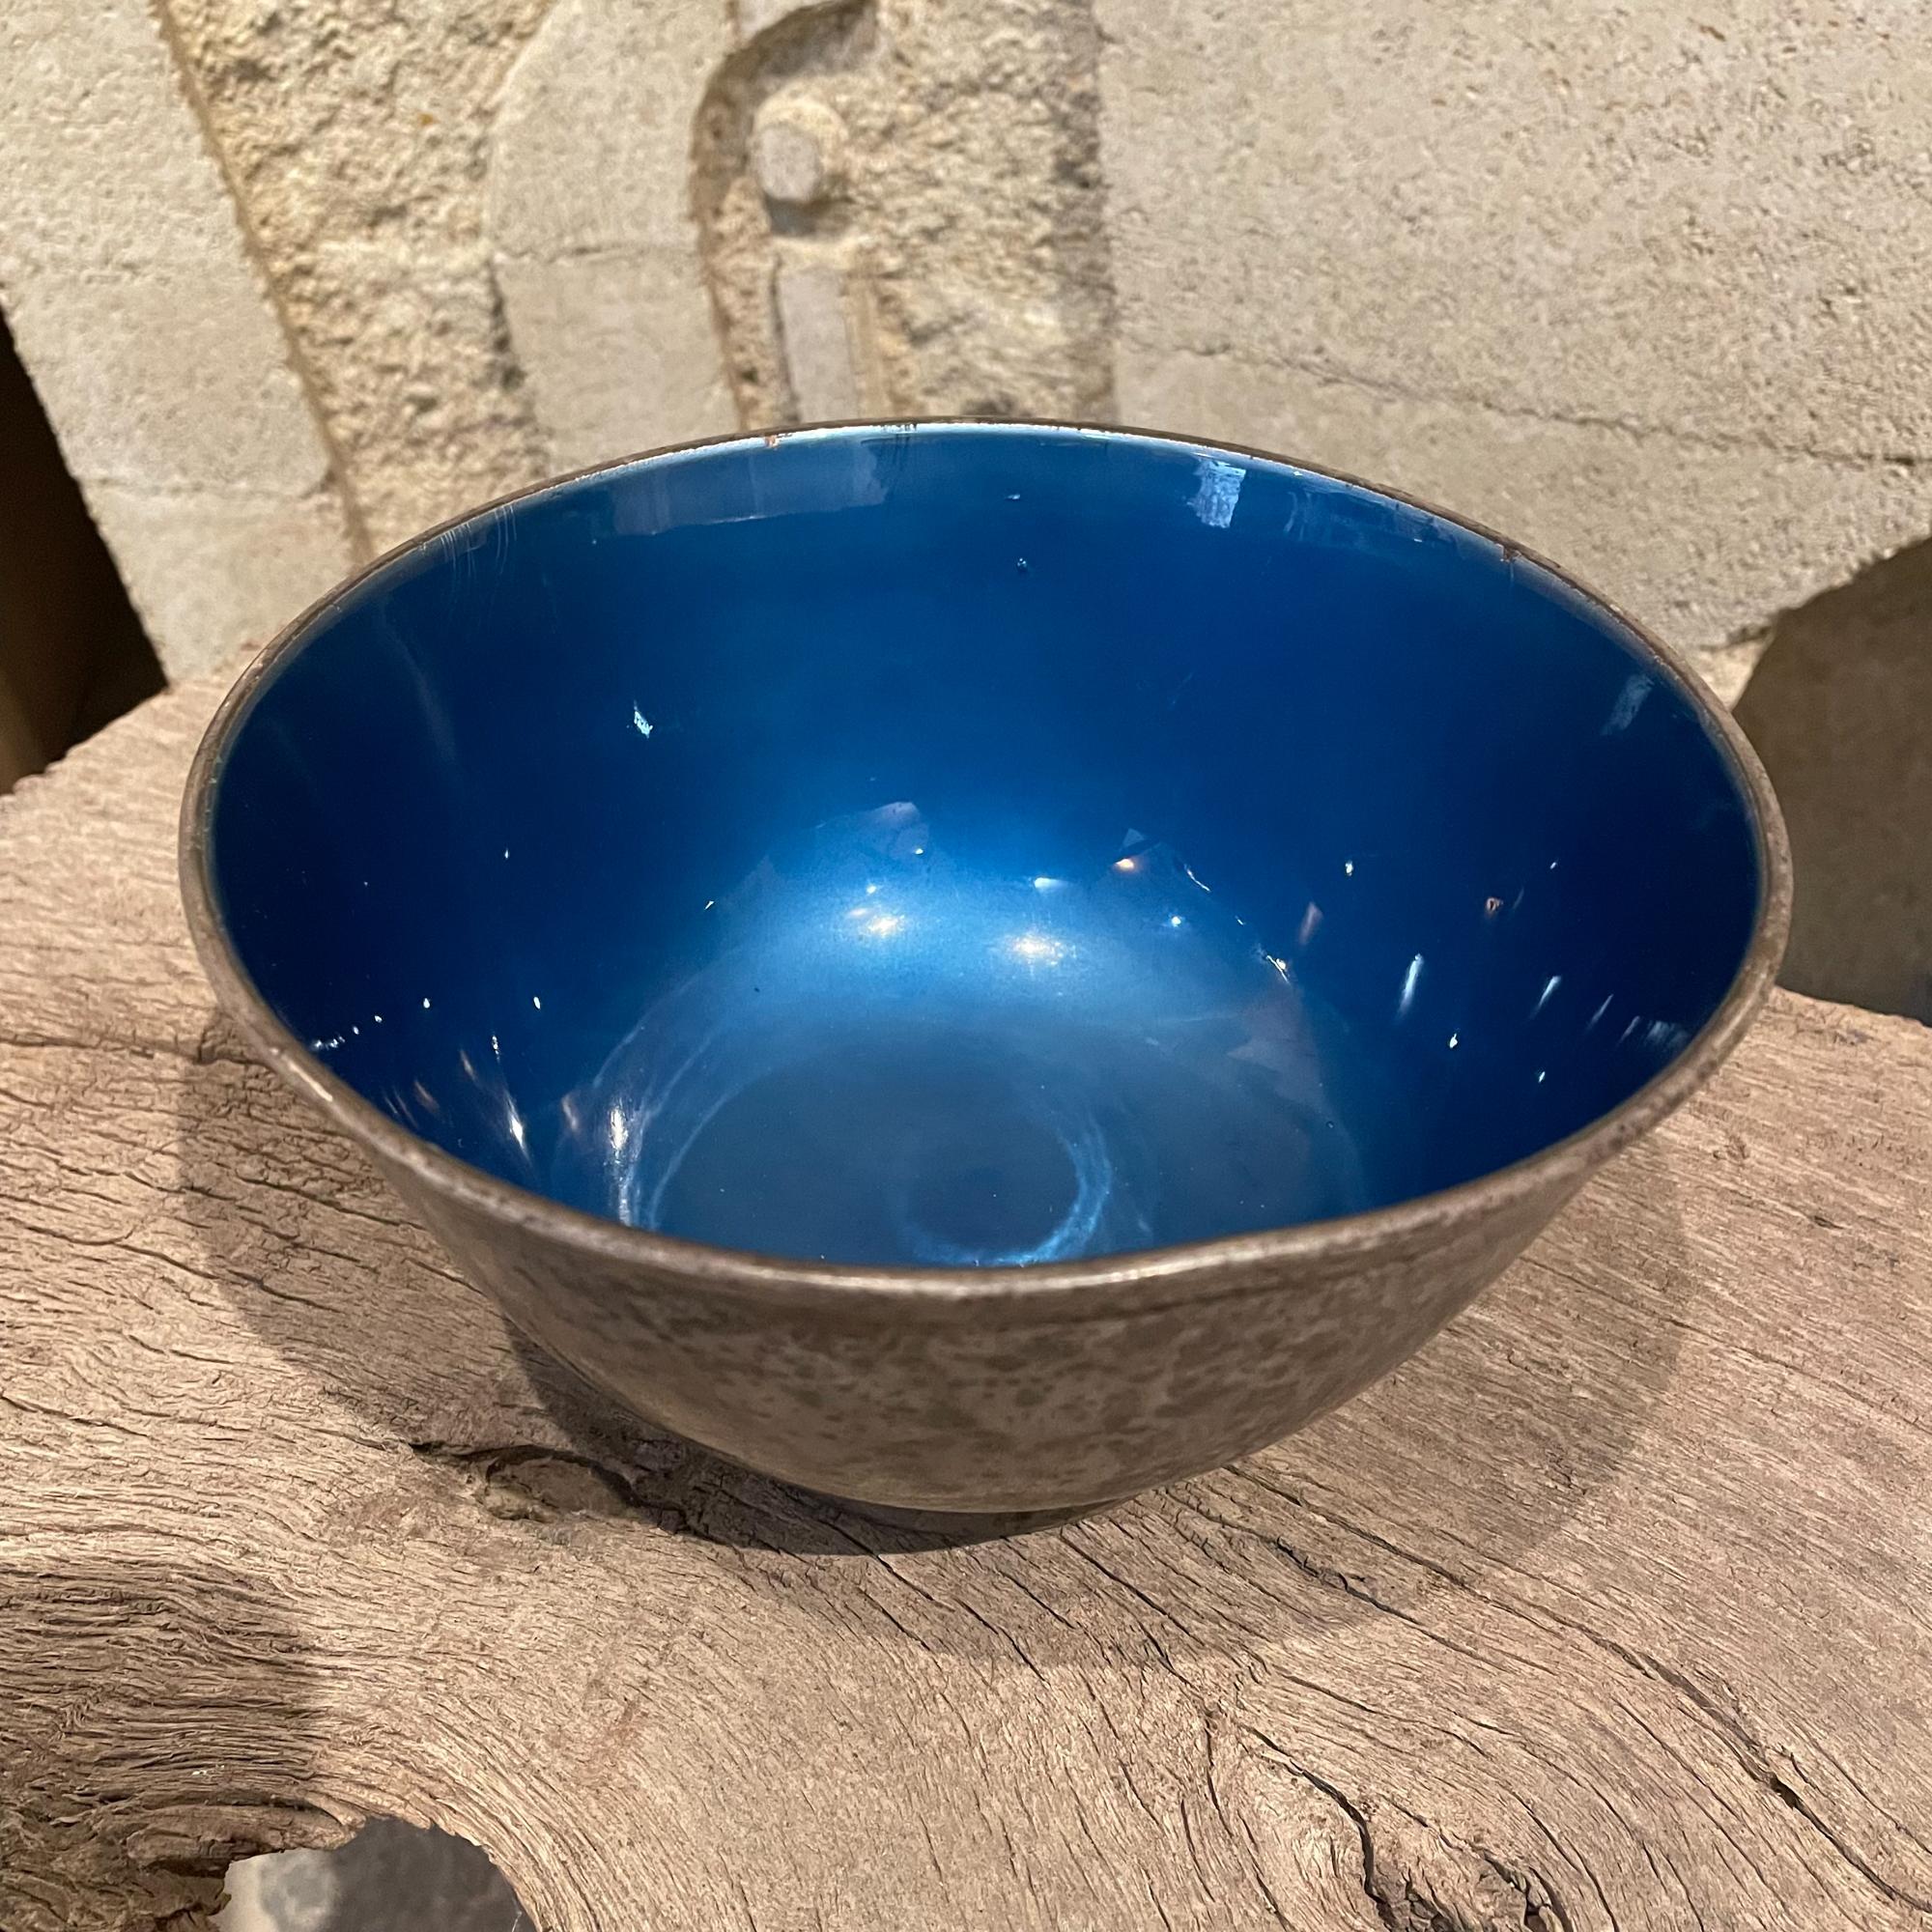 Offering you: Towle Silversmiths mid century silver plate blue enamel bowl vintage piece circa 1970s
Measures: 7 in diameter x 3.88 inches
Lustrous Blue Colored Enamel with Silver plate
Maker Stamped TOWLE EP 5003
Damage on interior. Vintage